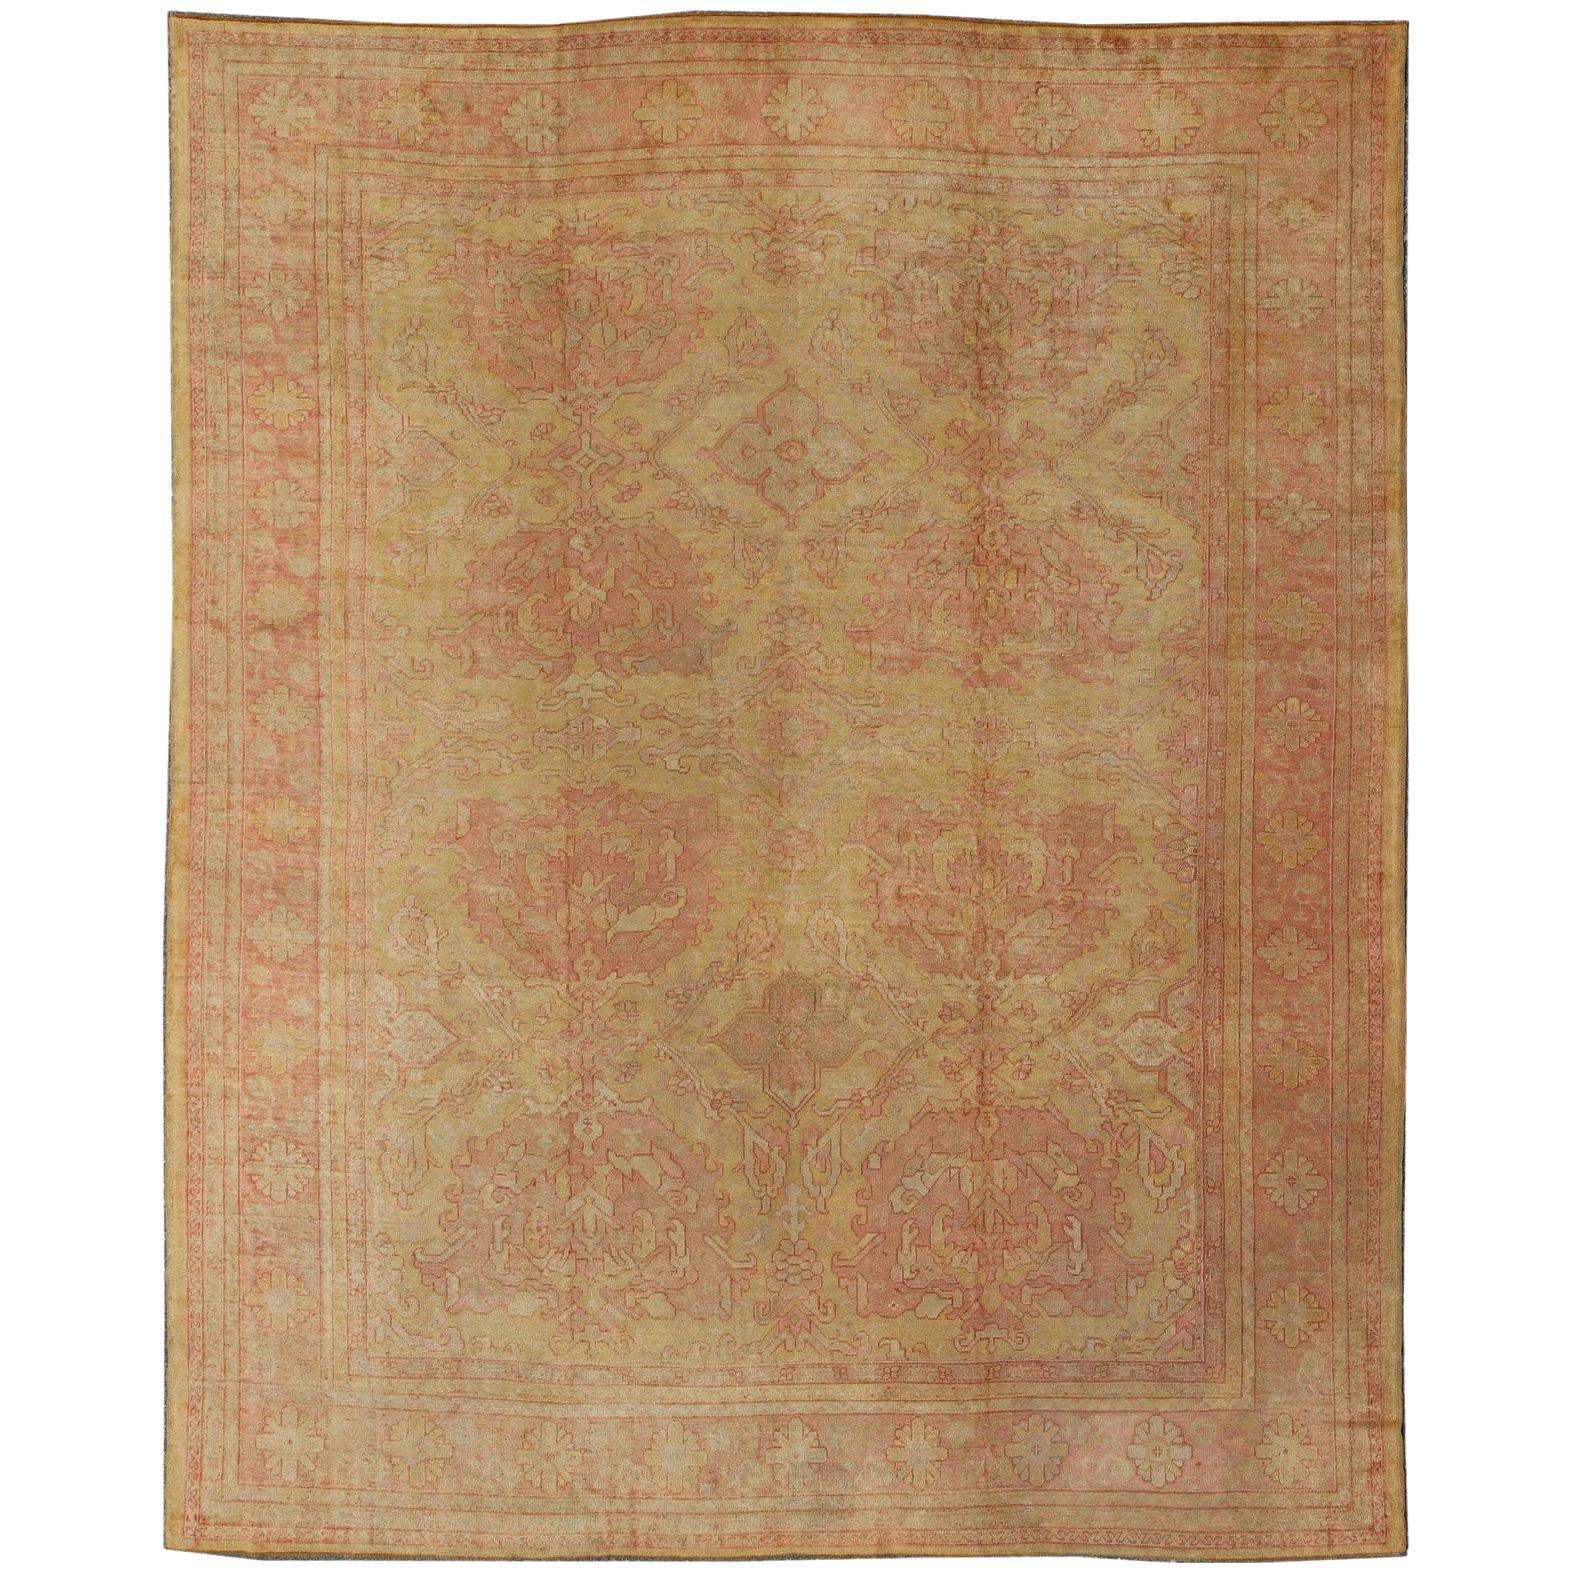 Antique Turkish Oushak Rug with Large Floral Motifs in Cream Yellow, Muted Coral